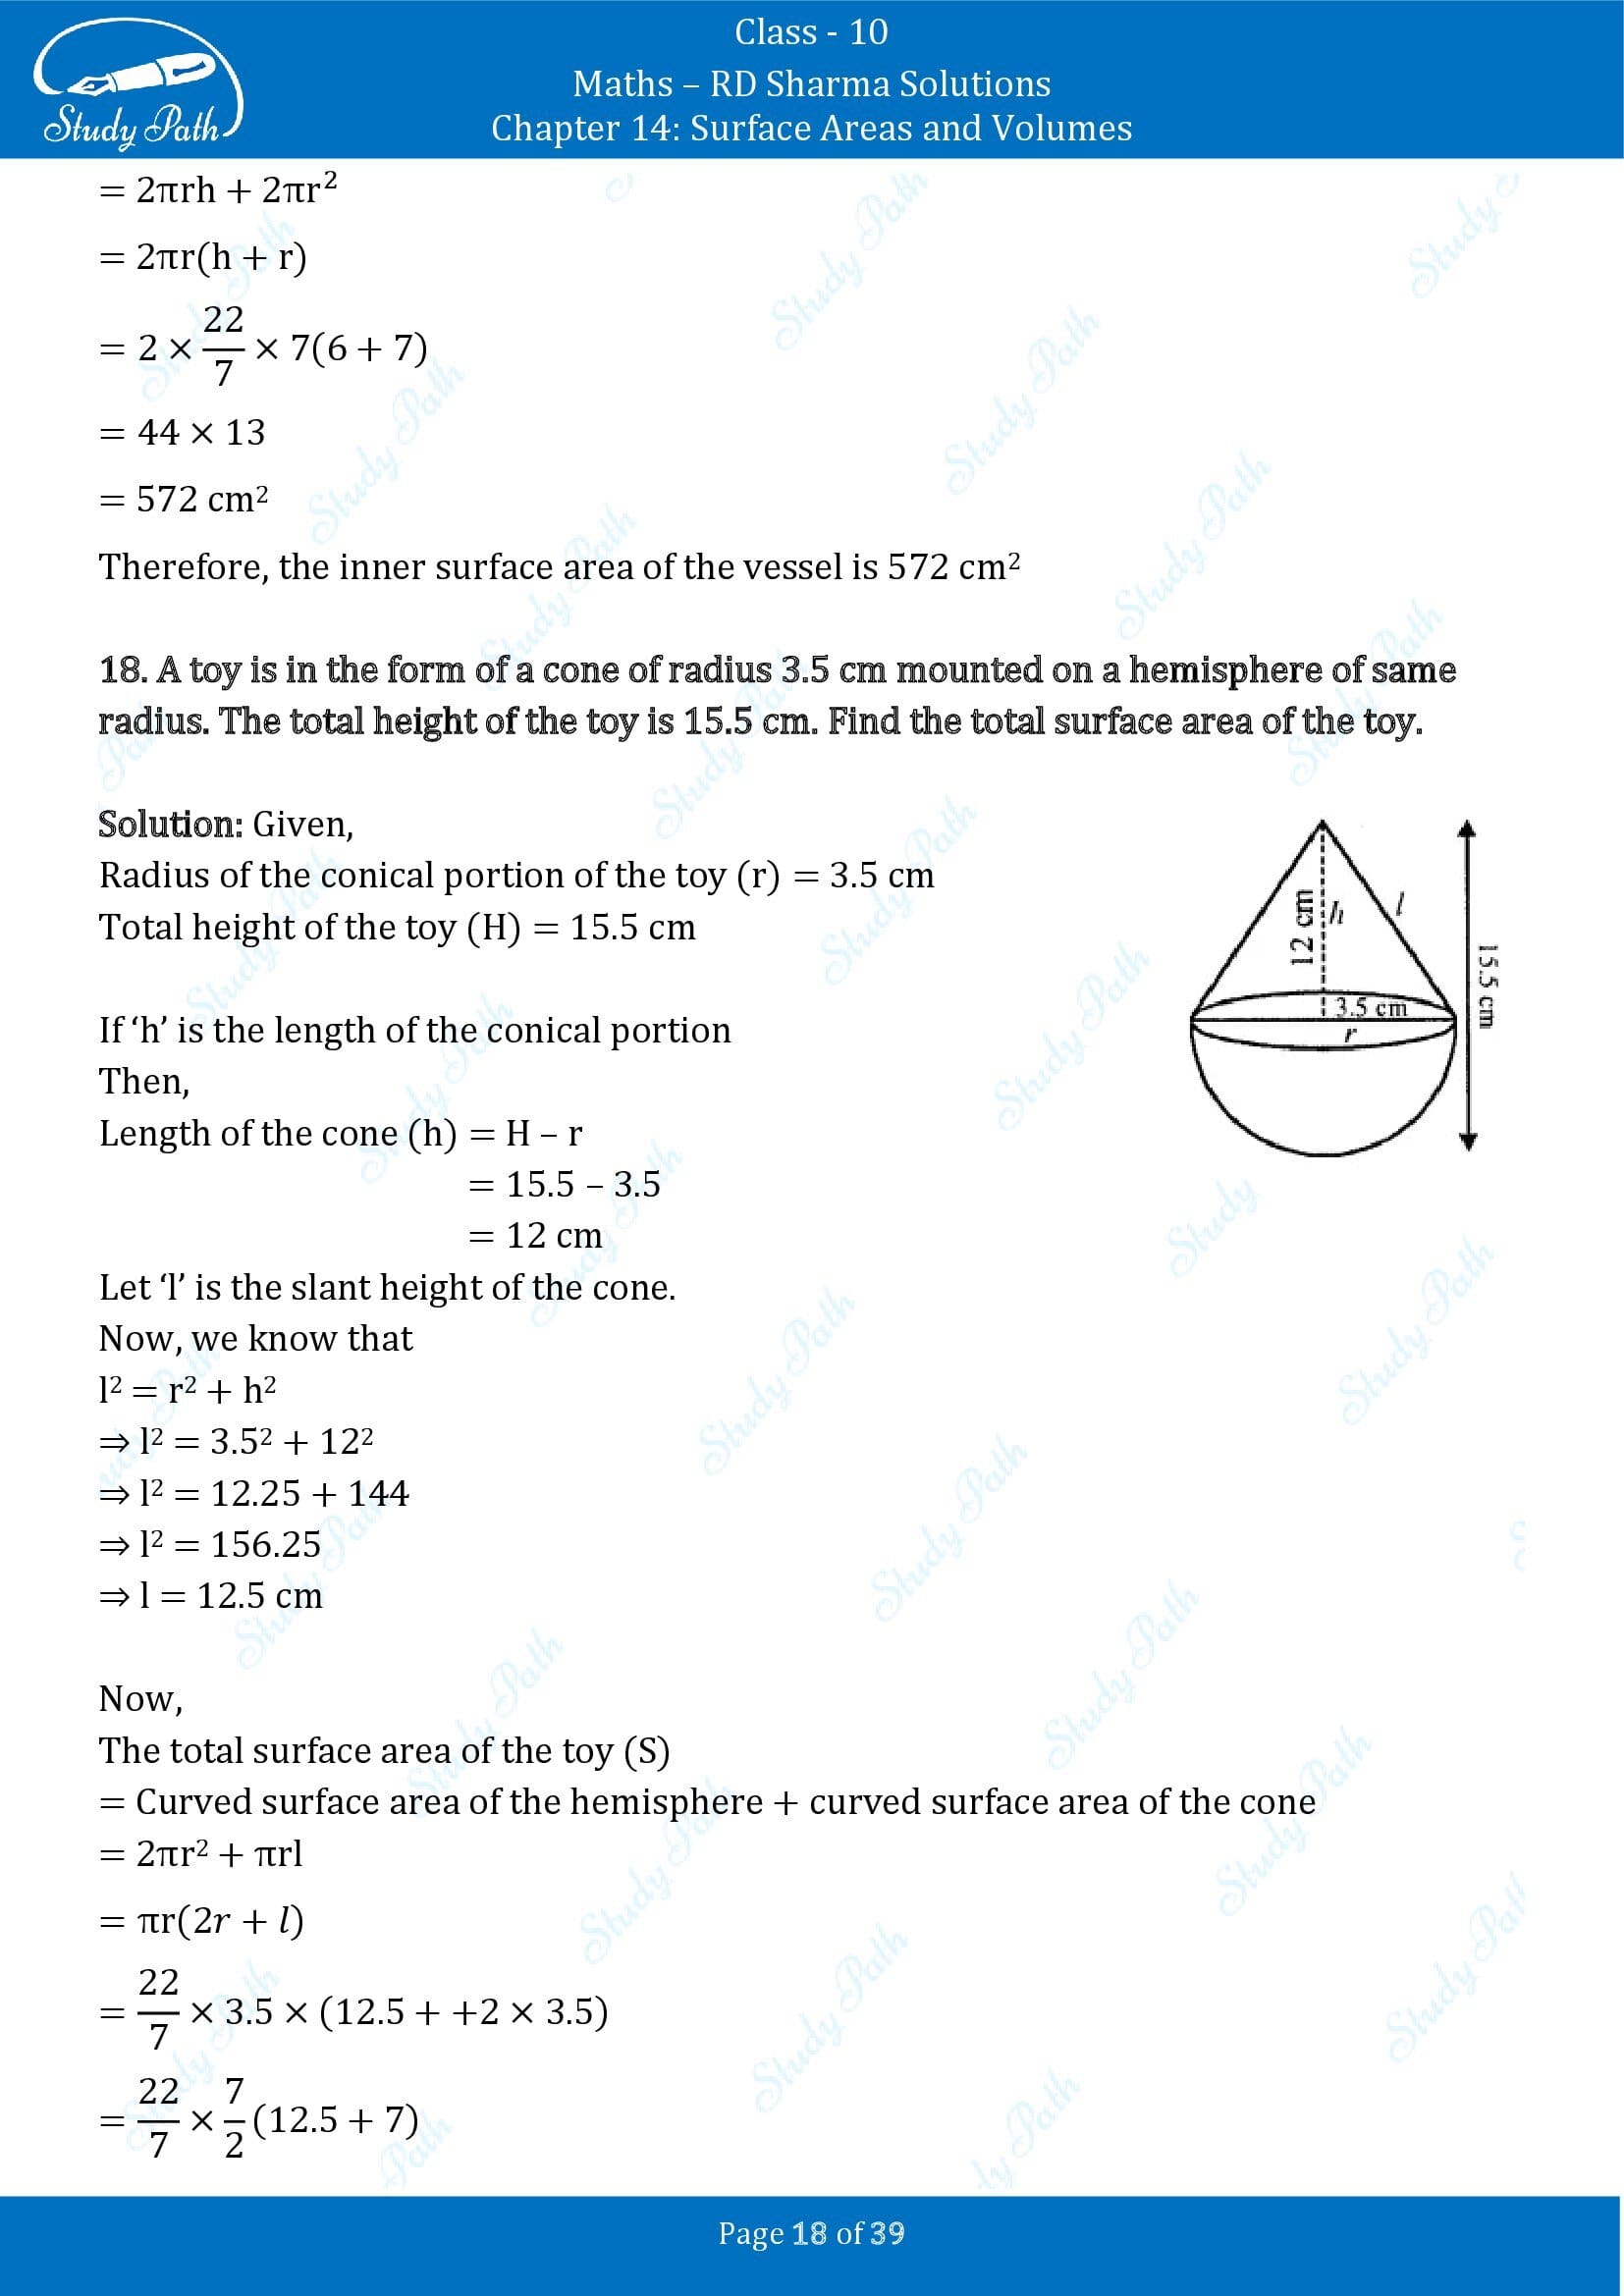 RD Sharma Solutions Class 10 Chapter 14 Surface Areas and Volumes Exercise 14.2 00018